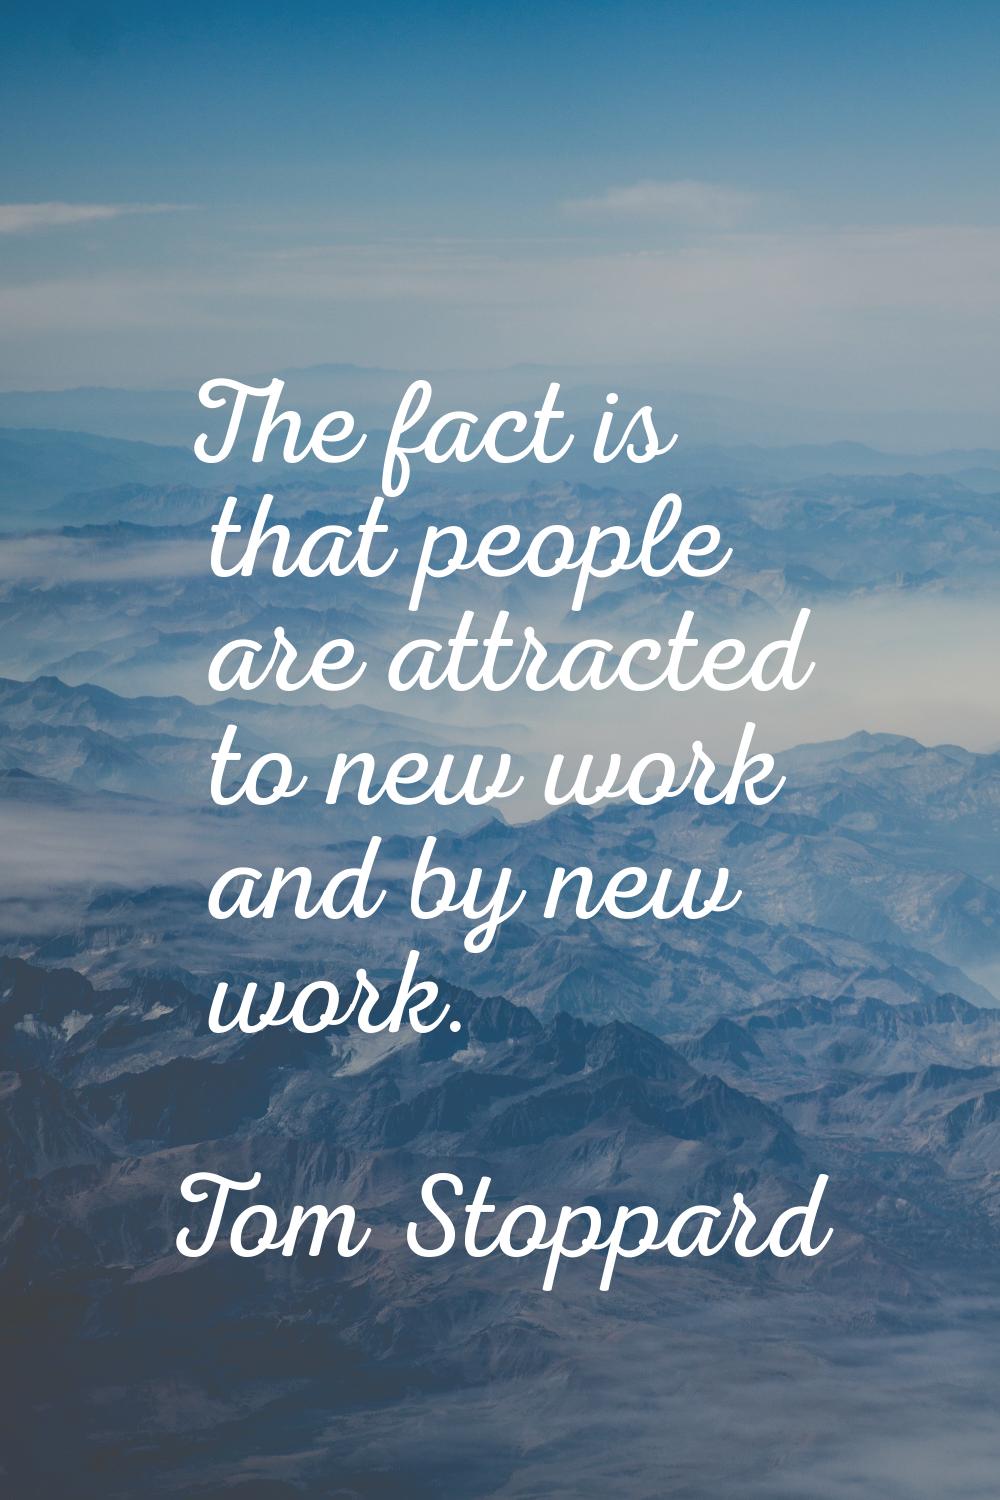 The fact is that people are attracted to new work and by new work.